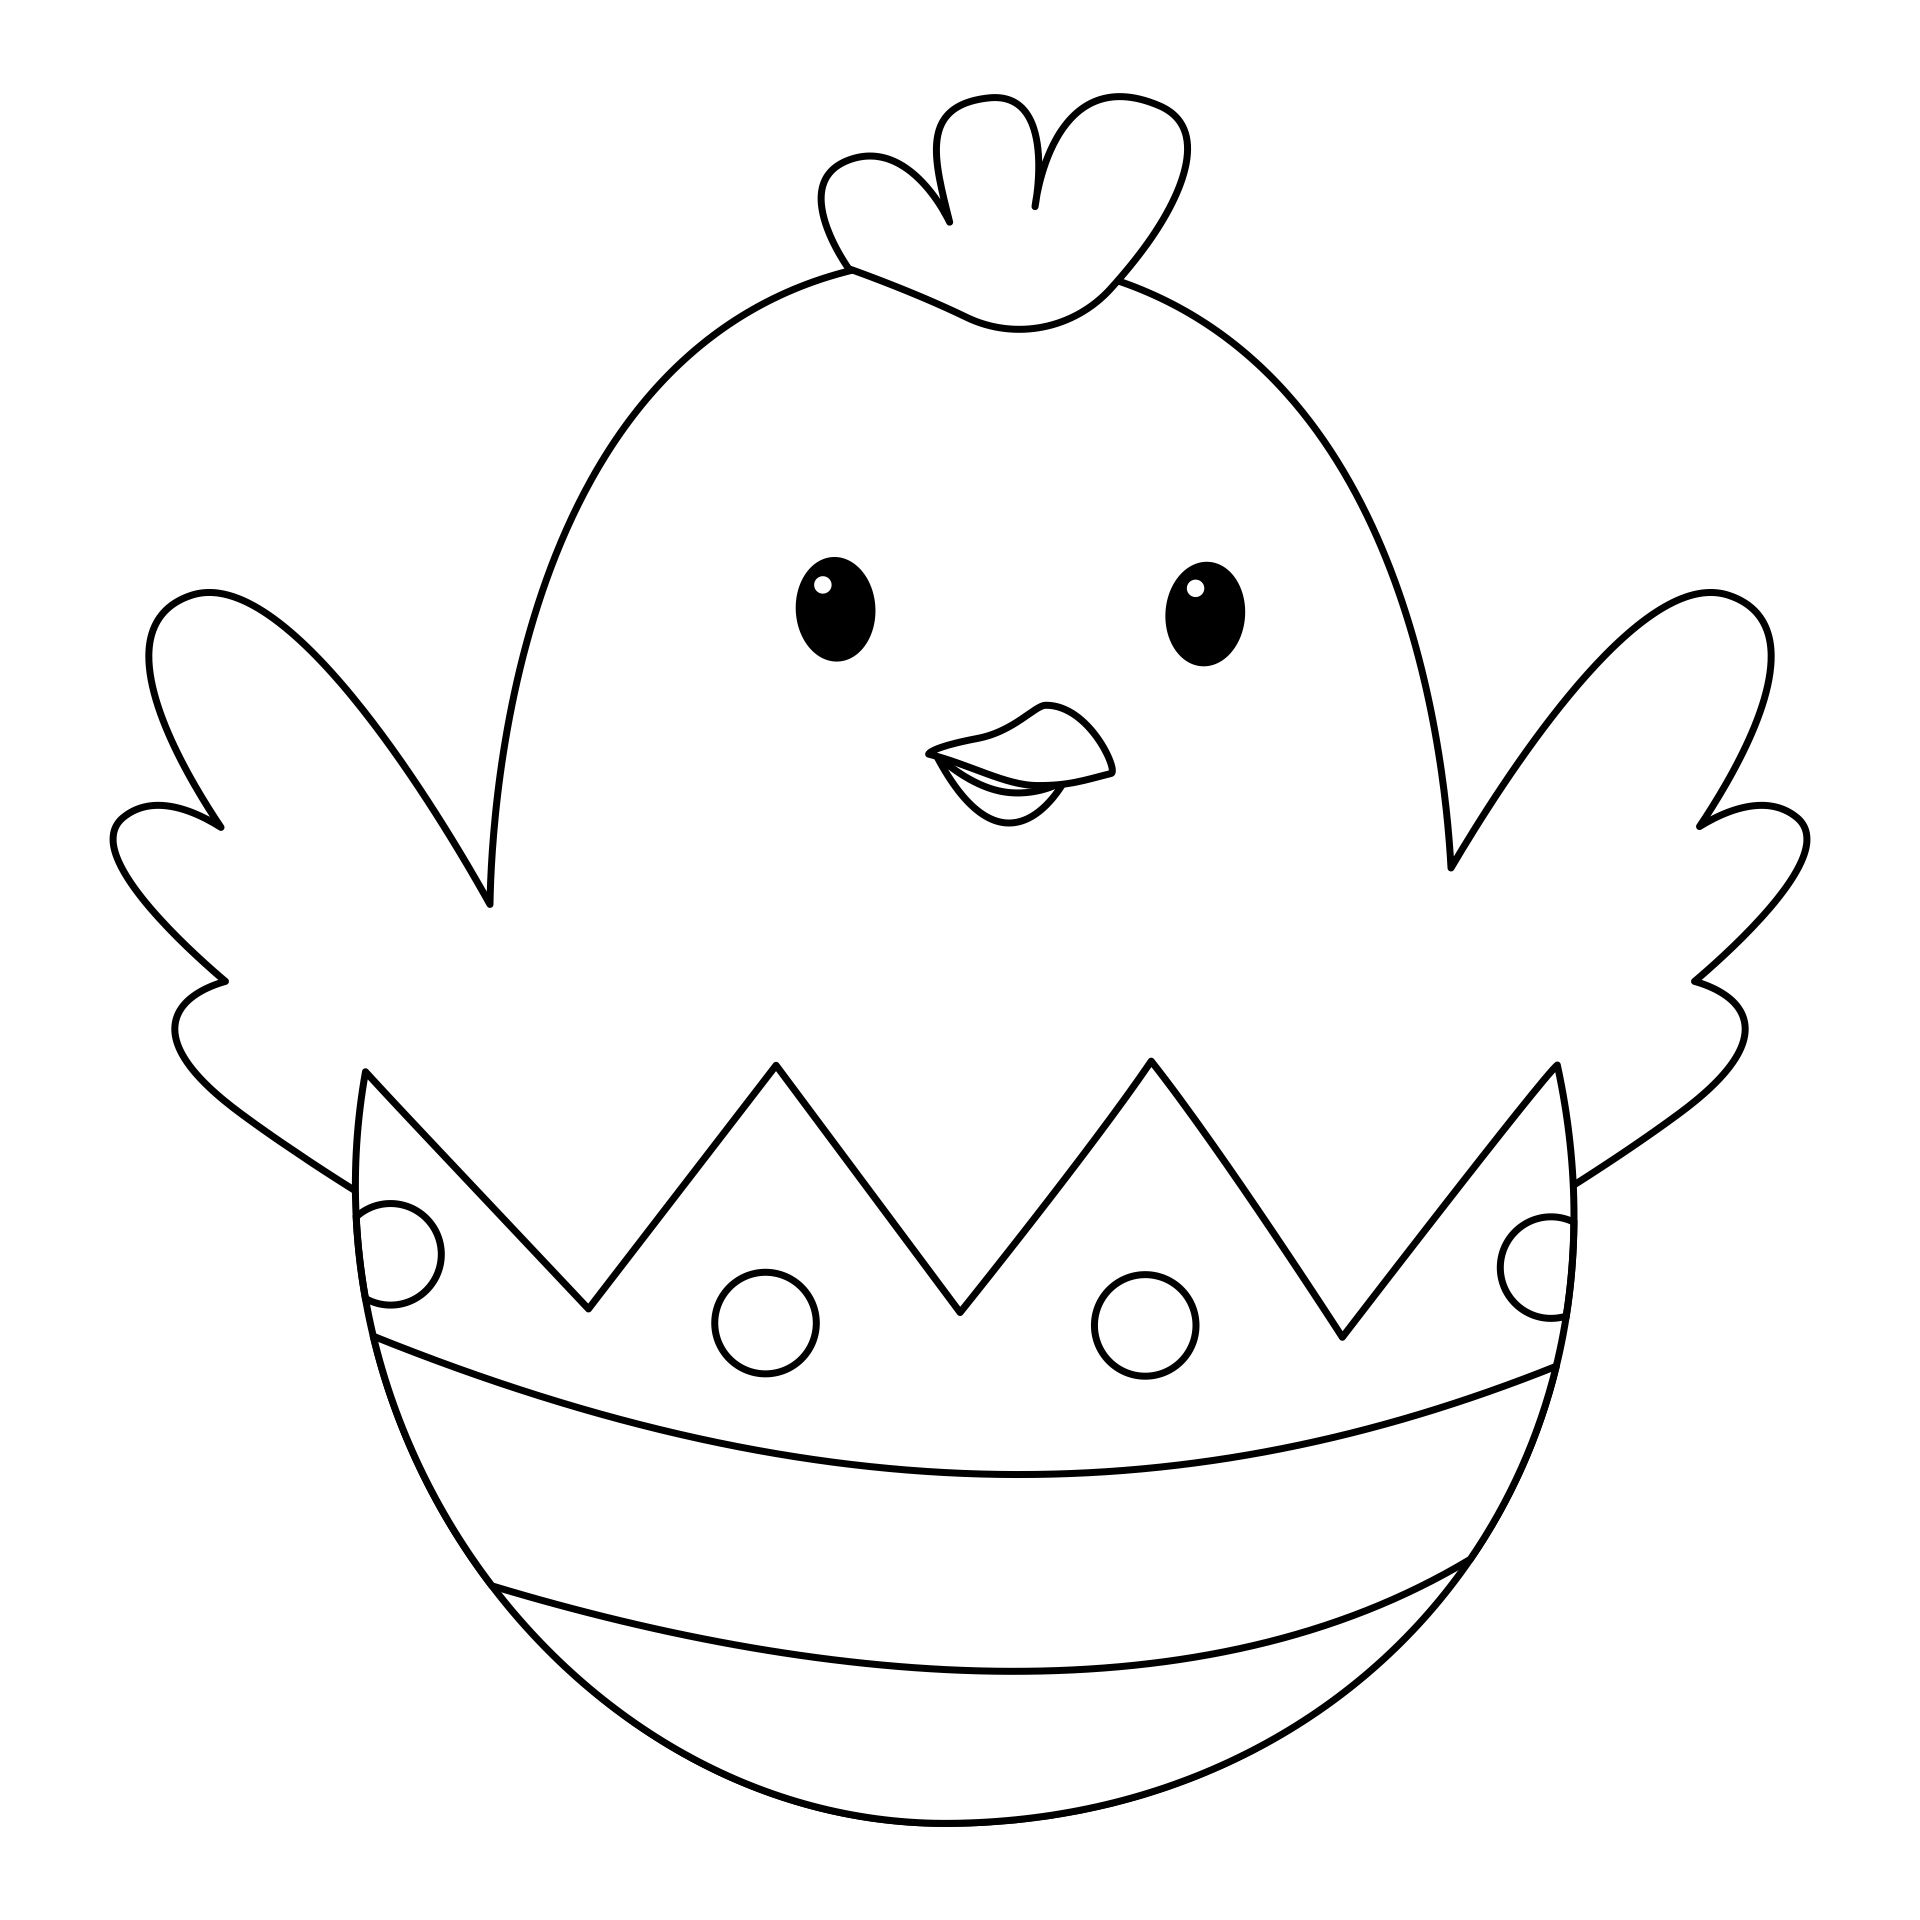 8-best-images-of-4-printable-easter-chick-easter-chick-template